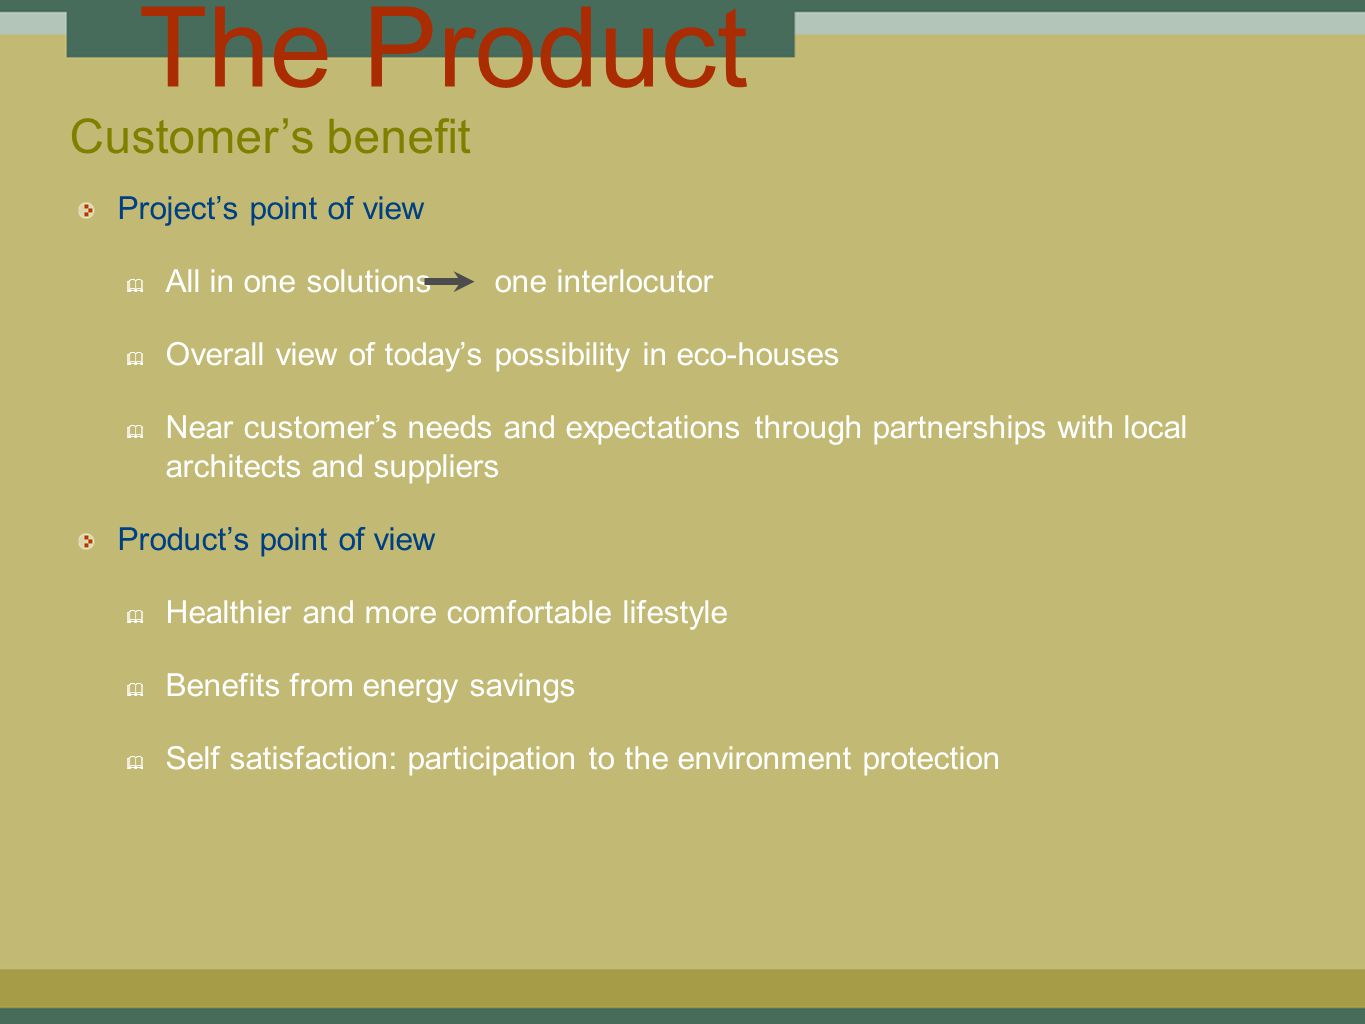 The Product Project’s point of view ✦ All in one solutions one interlocutor ✦ Overall view of today’s possibility in eco-houses ✦ Near customer’s needs and expectations through partnerships with local architects and suppliers Product’s point of view ✦ Healthier and more comfortable lifestyle ✦ Benefits from energy savings ✦ Self satisfaction: participation to the environment protection Customer’s benefit